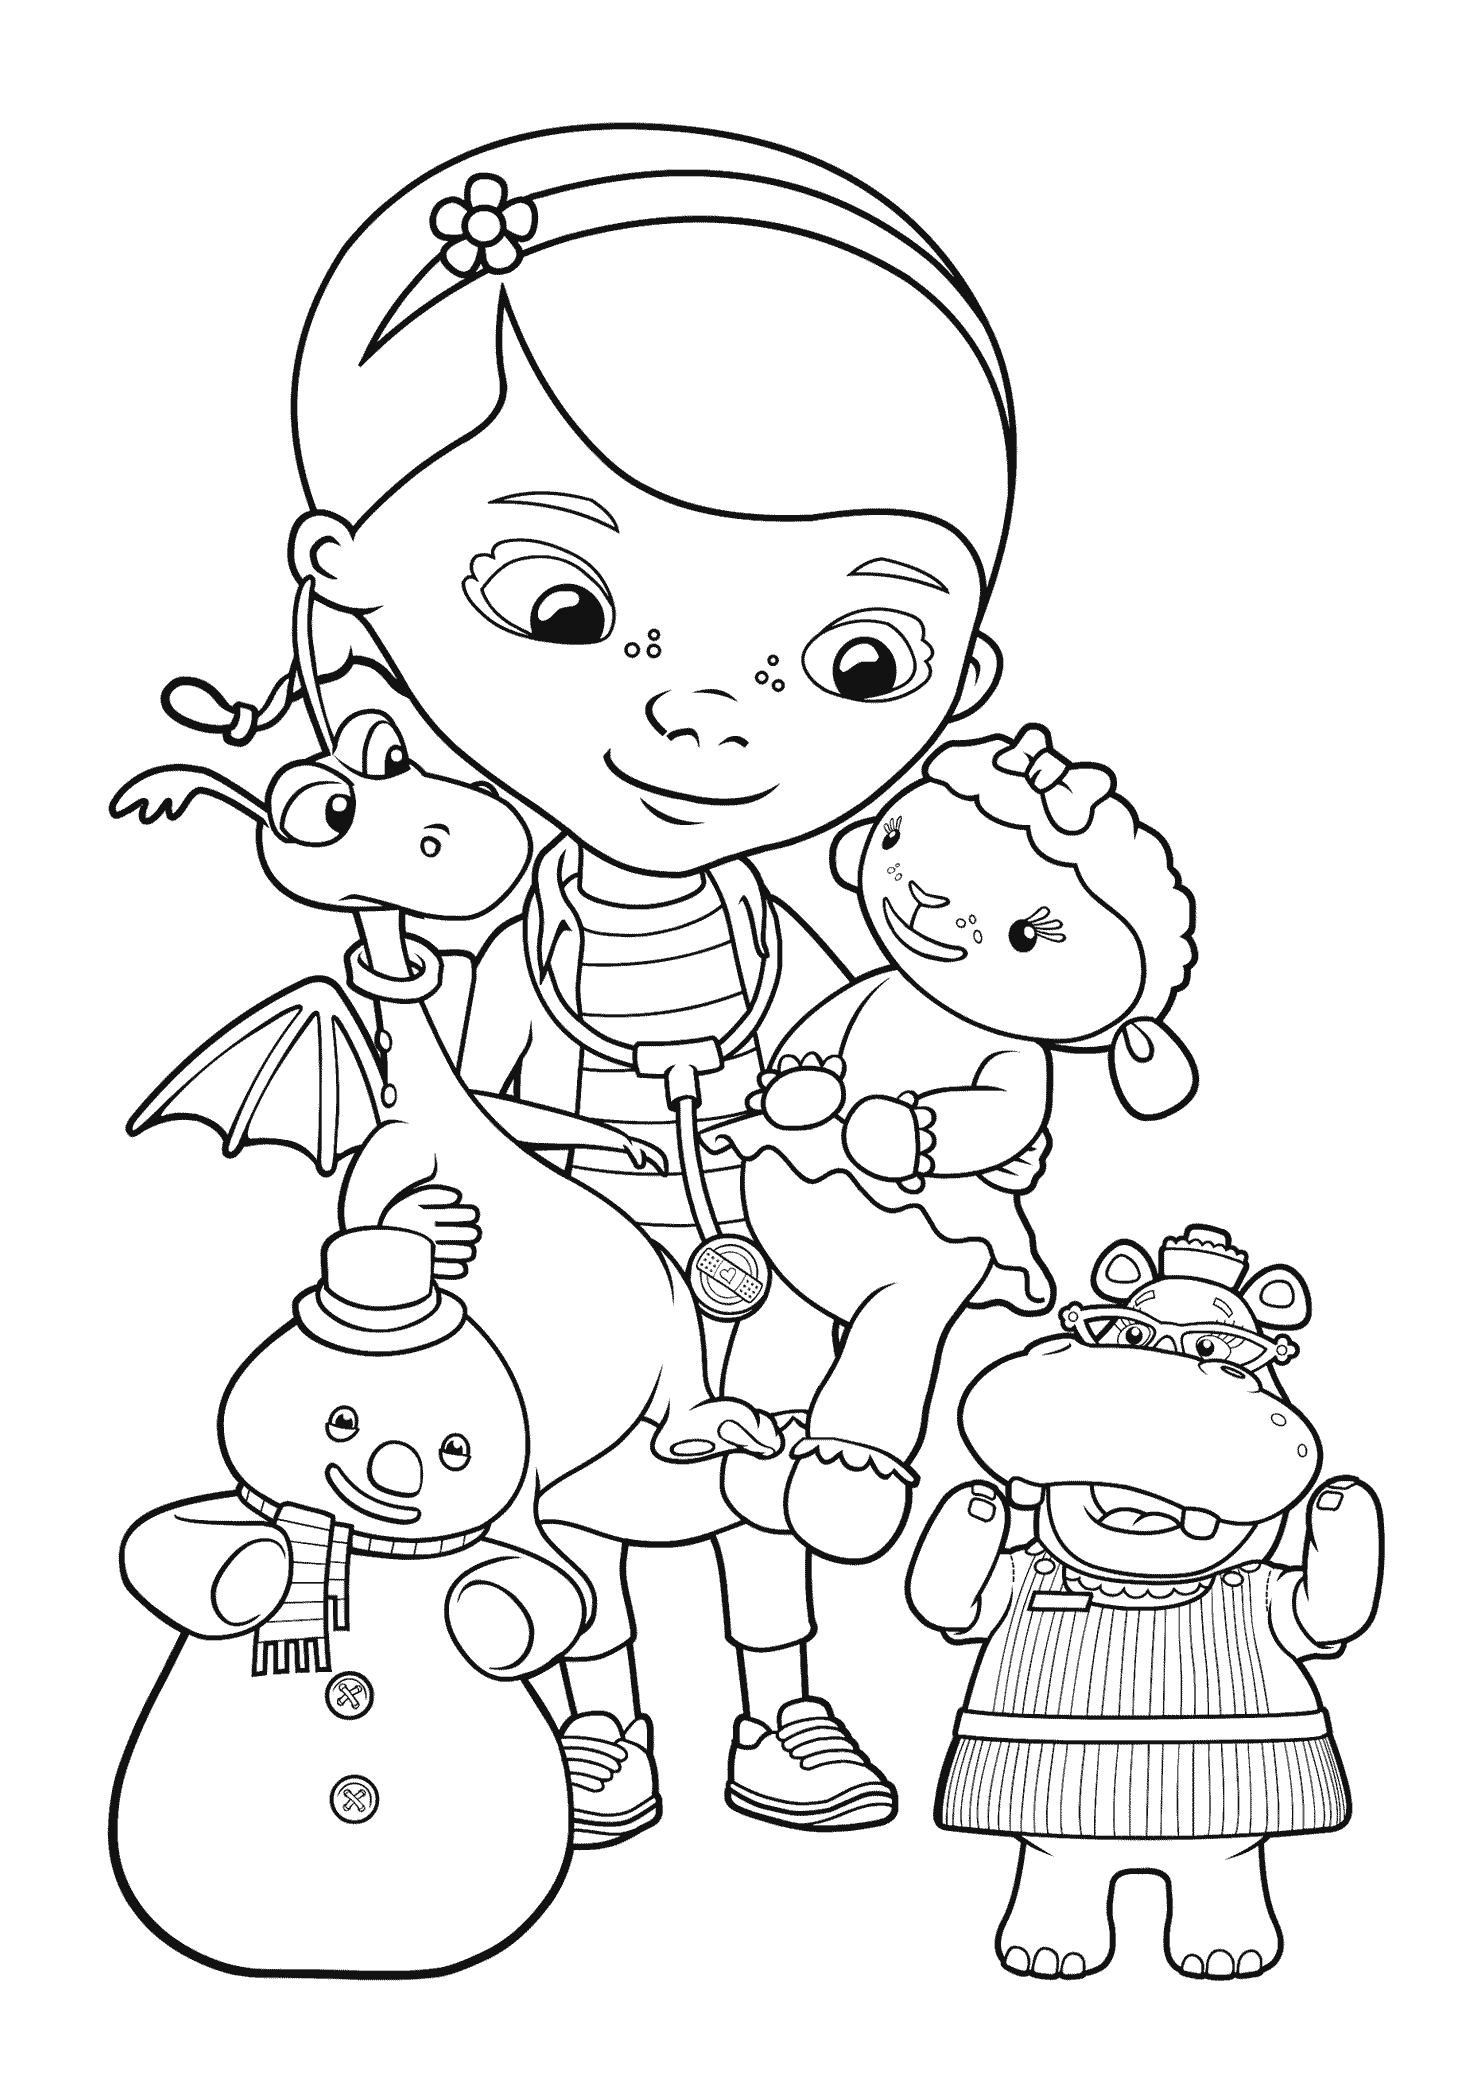 Doc Mcstuffin Colouring Book - High Quality Coloring Pages